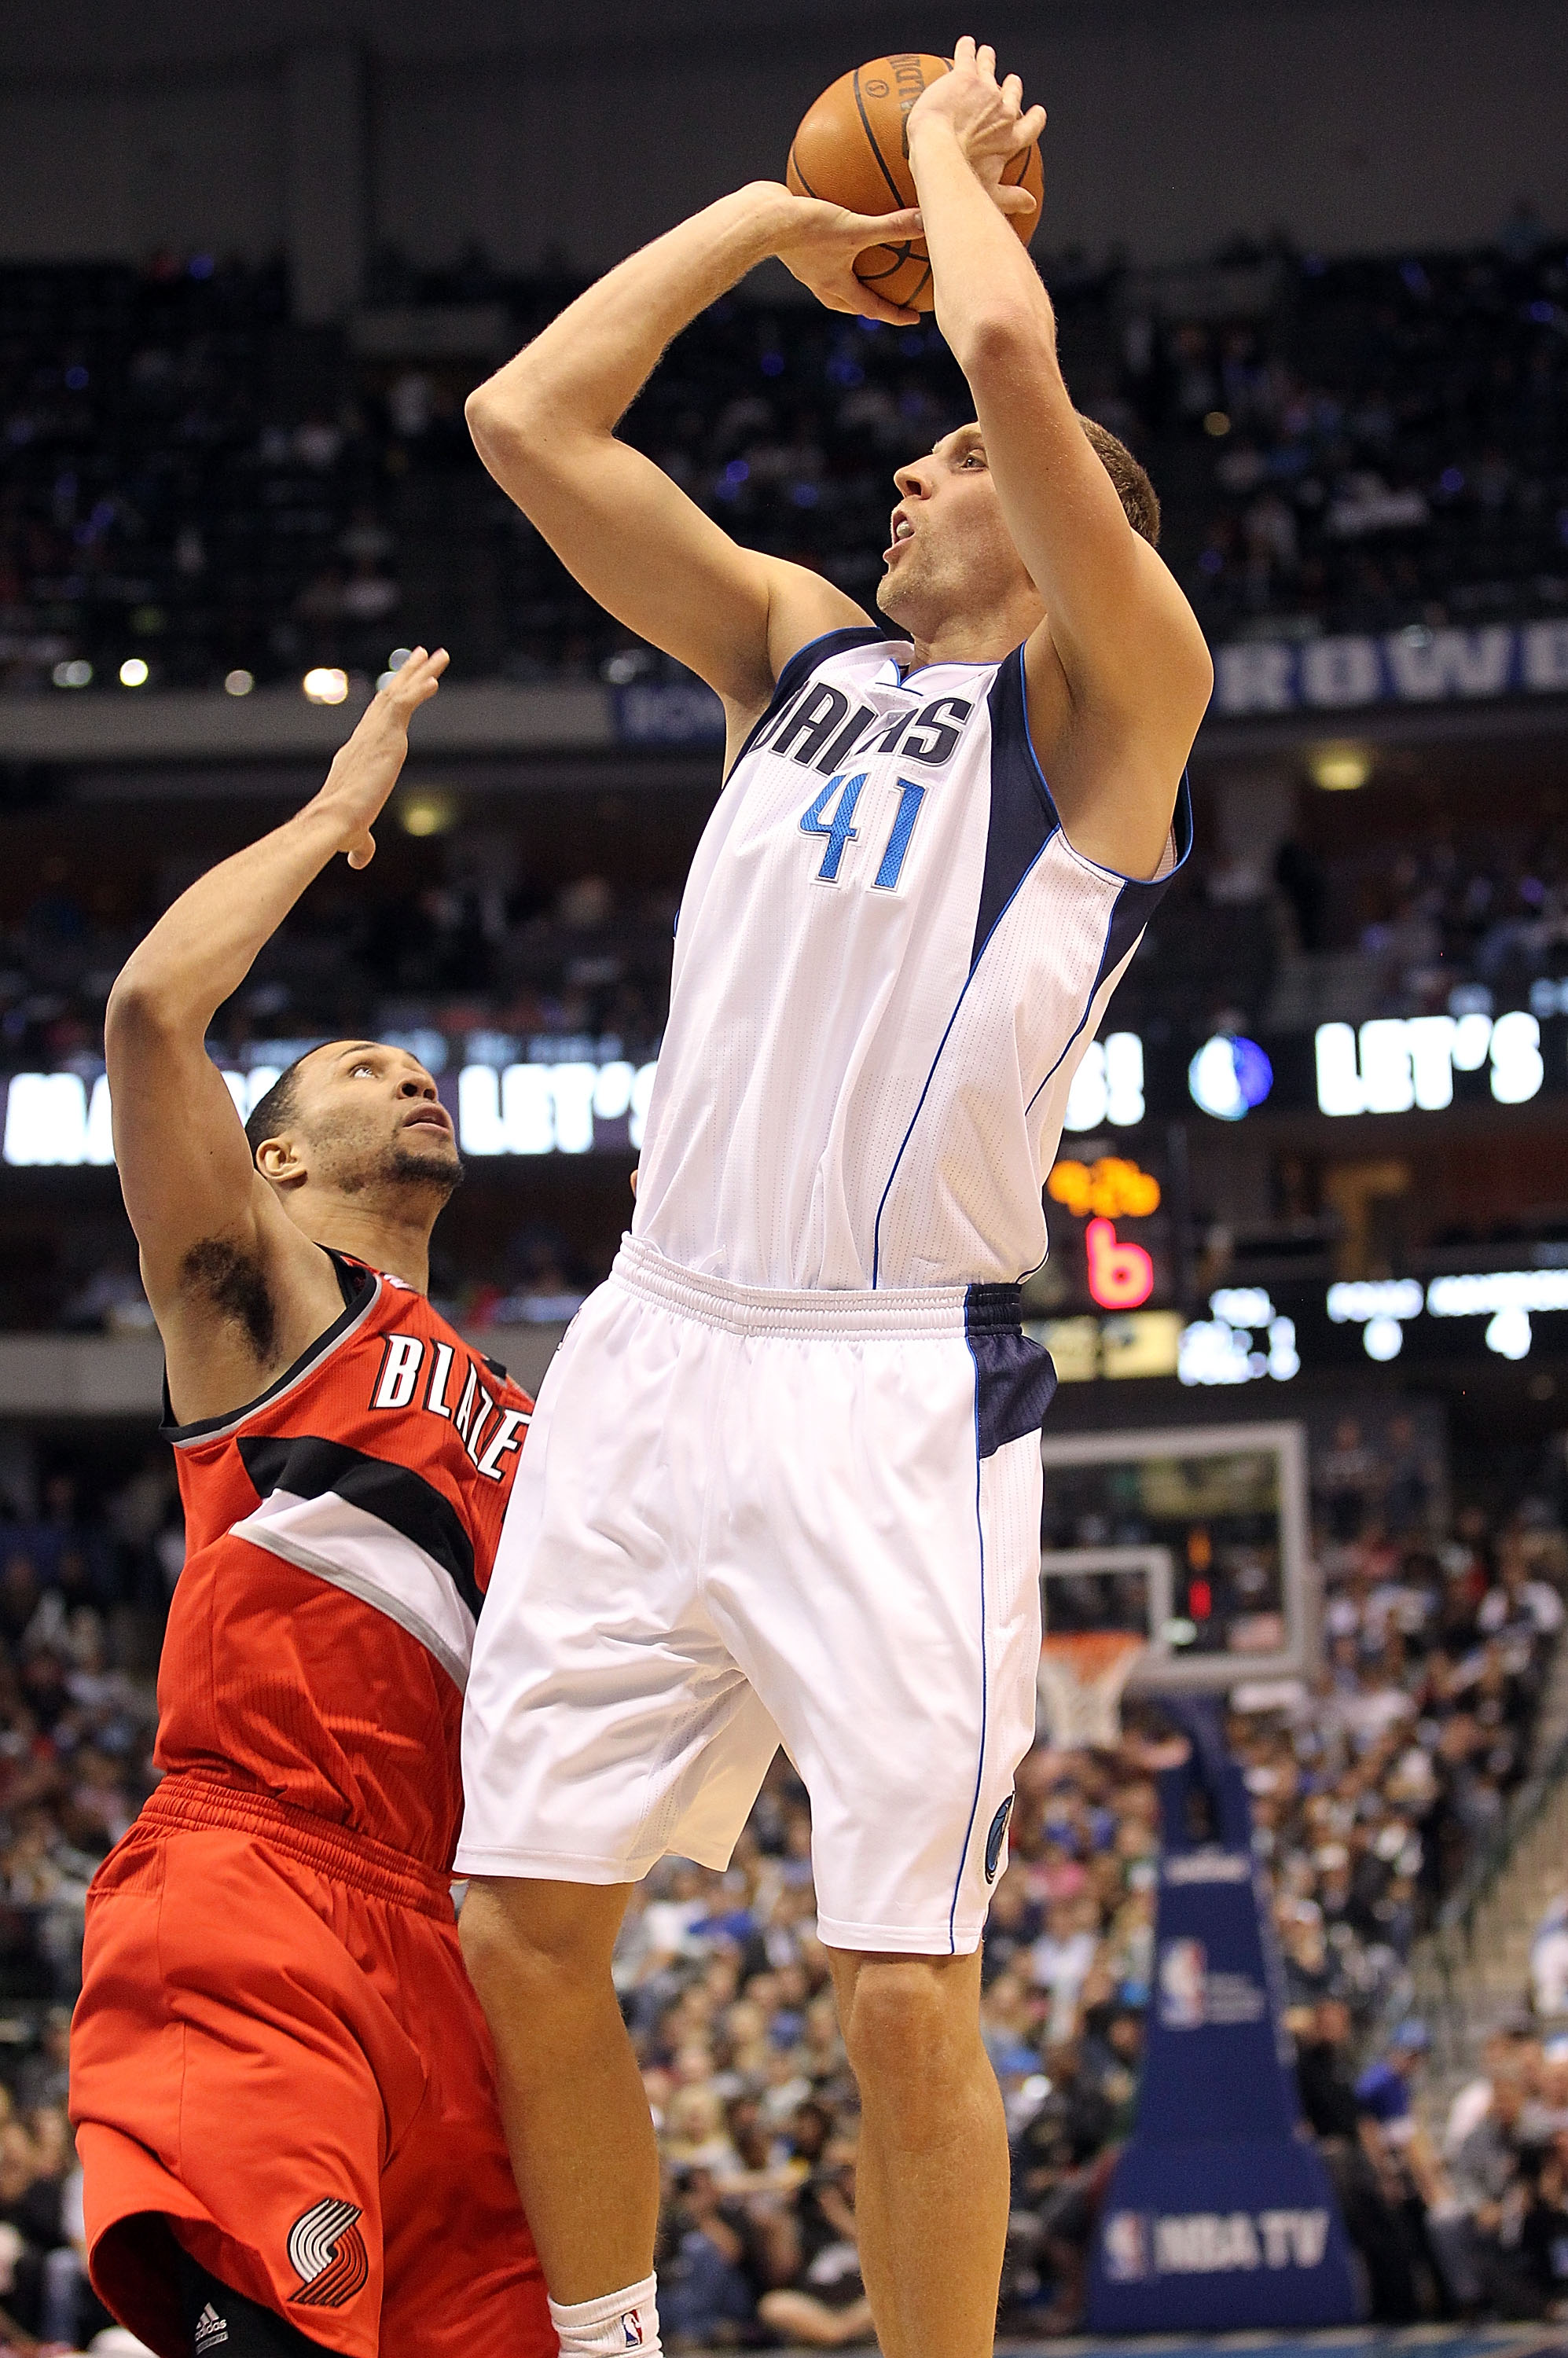 DALLAS, TX - DECEMBER 15: Forward Dirk Nowitzki #41 of the Dallas Mavericks takes a shot against Brandon Roy #7 of the Portland Trail Blazers at American Airlines Center on December 15, 2010 in Dallas, Texas.  NOTE TO USER: User expressly acknowledges and